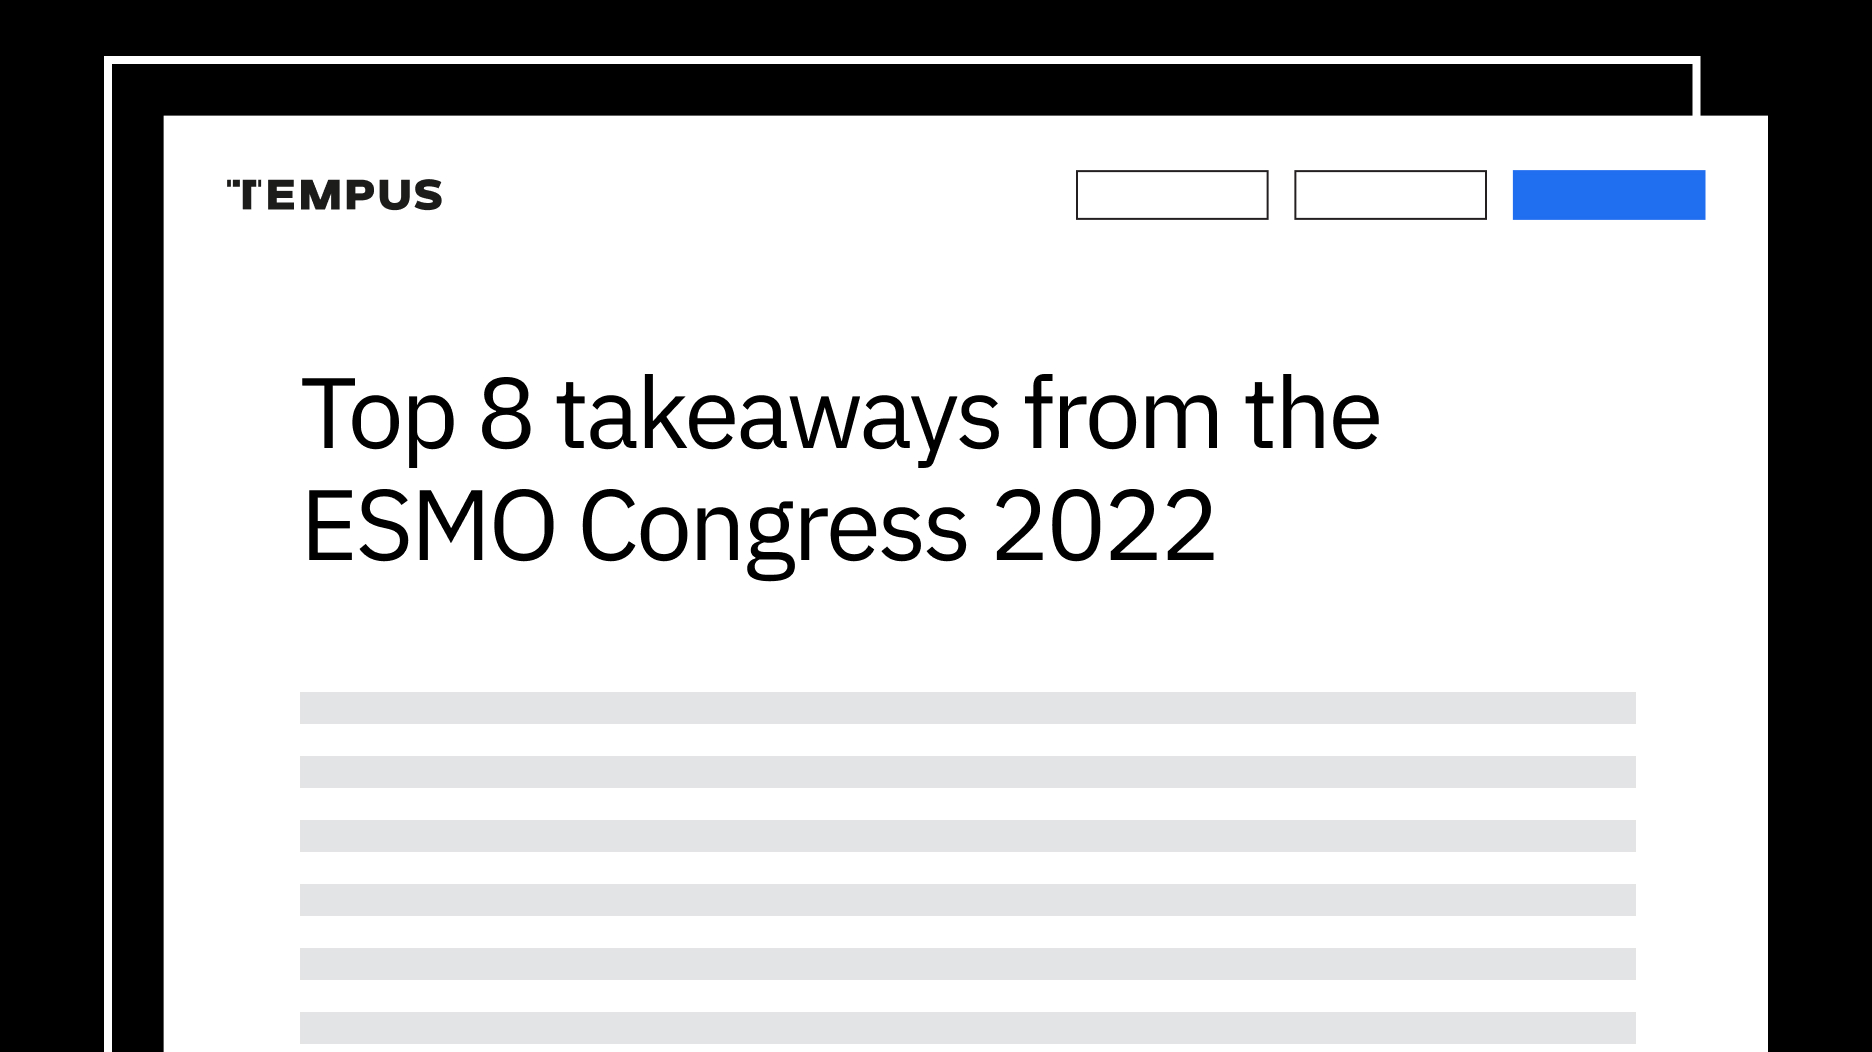 Top 8 takeaways from the ESMO Congress 2022